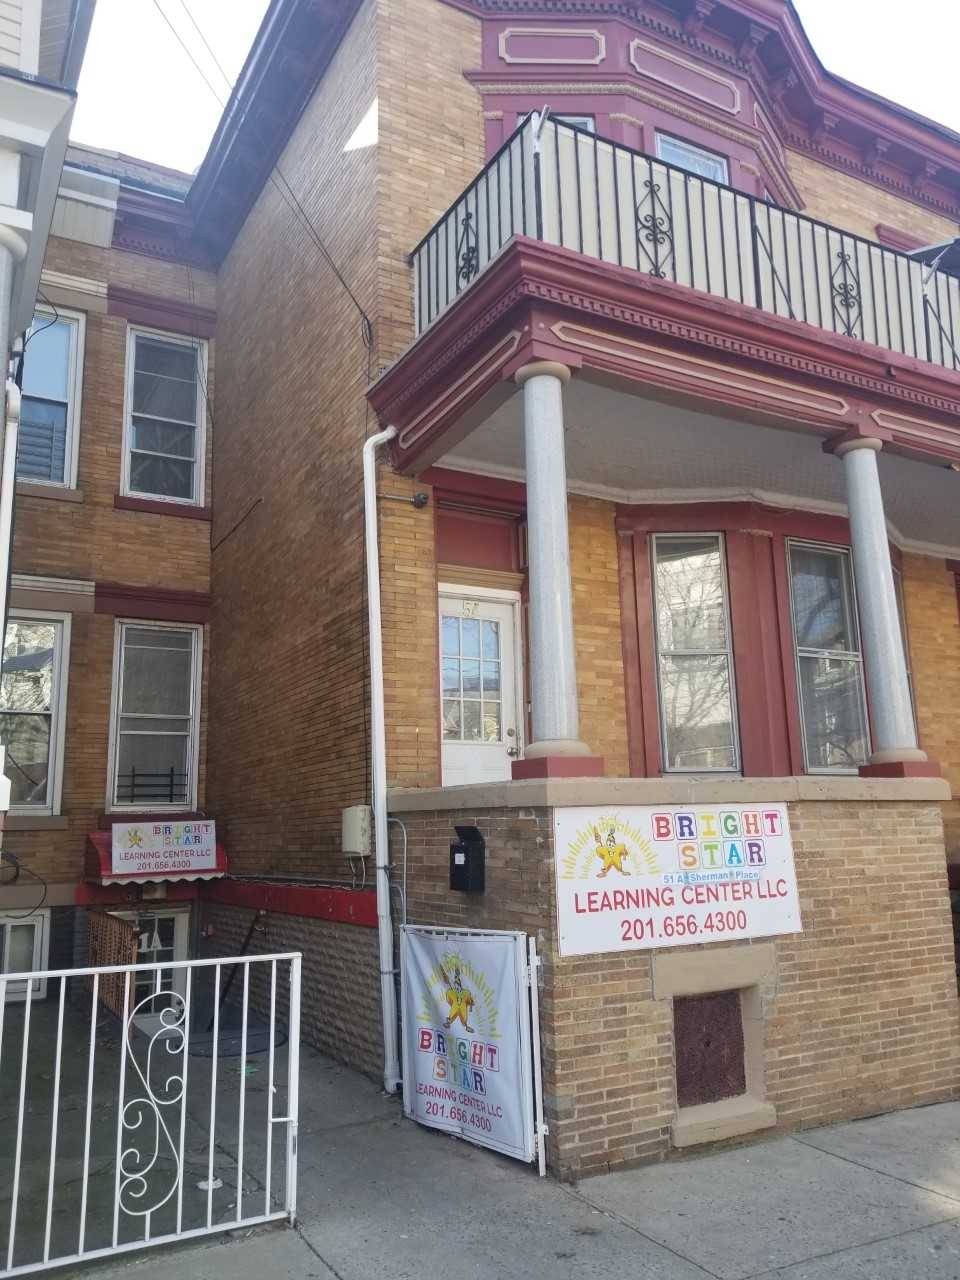 2 family + commercial space in Jersey City Heights